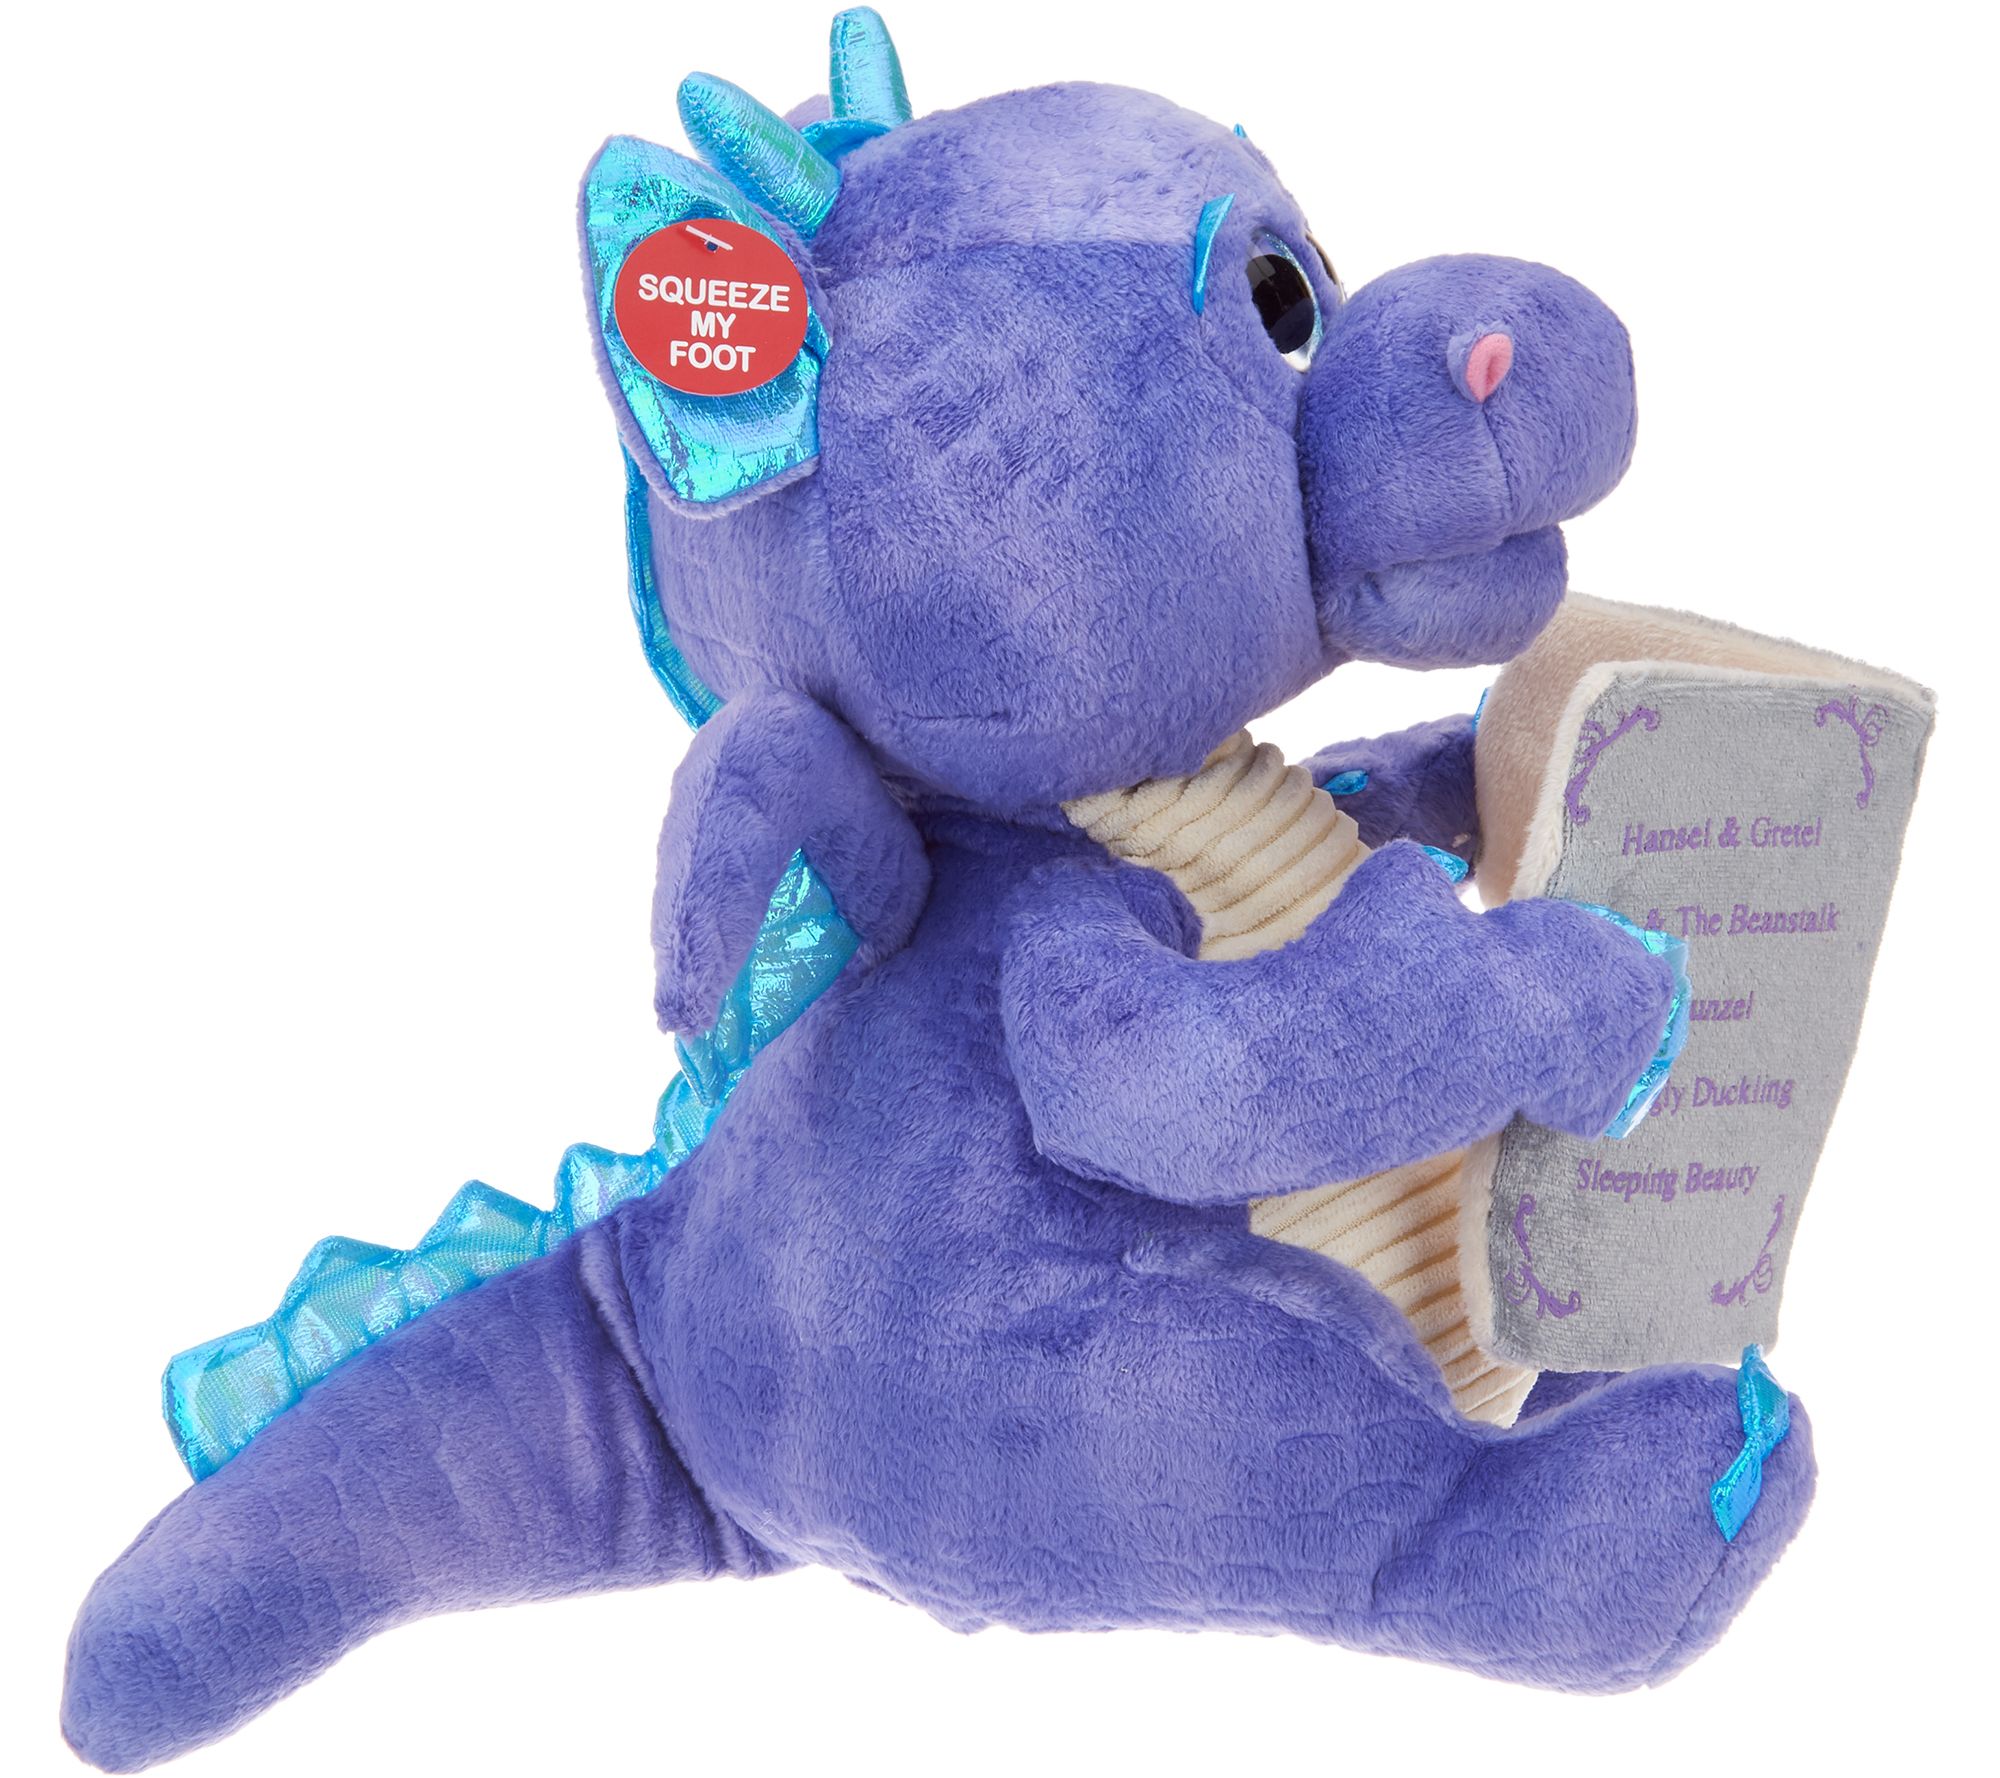 Bible Story Time by Cuddle Barn SG/_B01M6CY6LB/_US Cuddle Barn Animated Plush Bear Pray With Me Pals